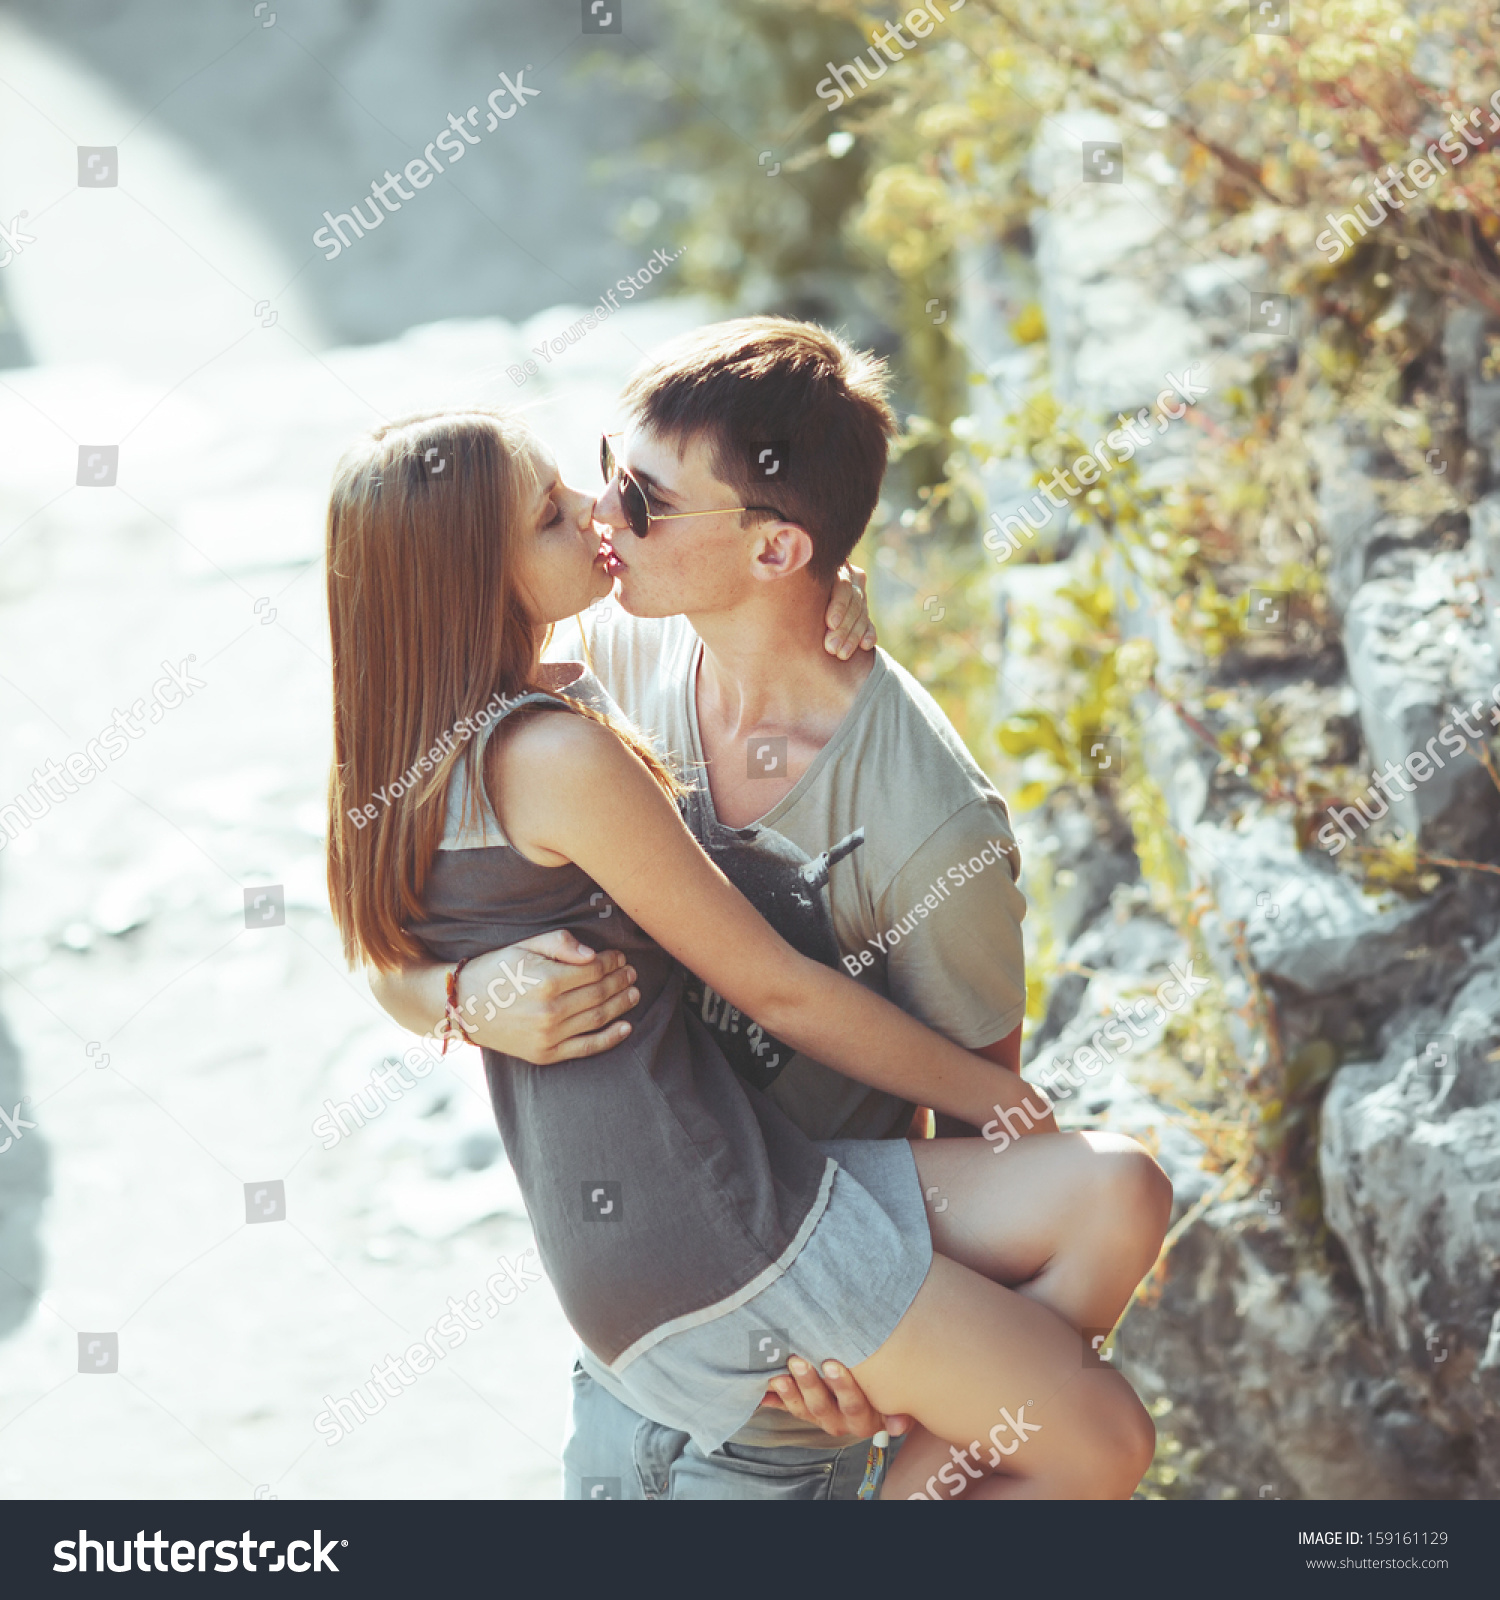 Teen Couples Kissing 58